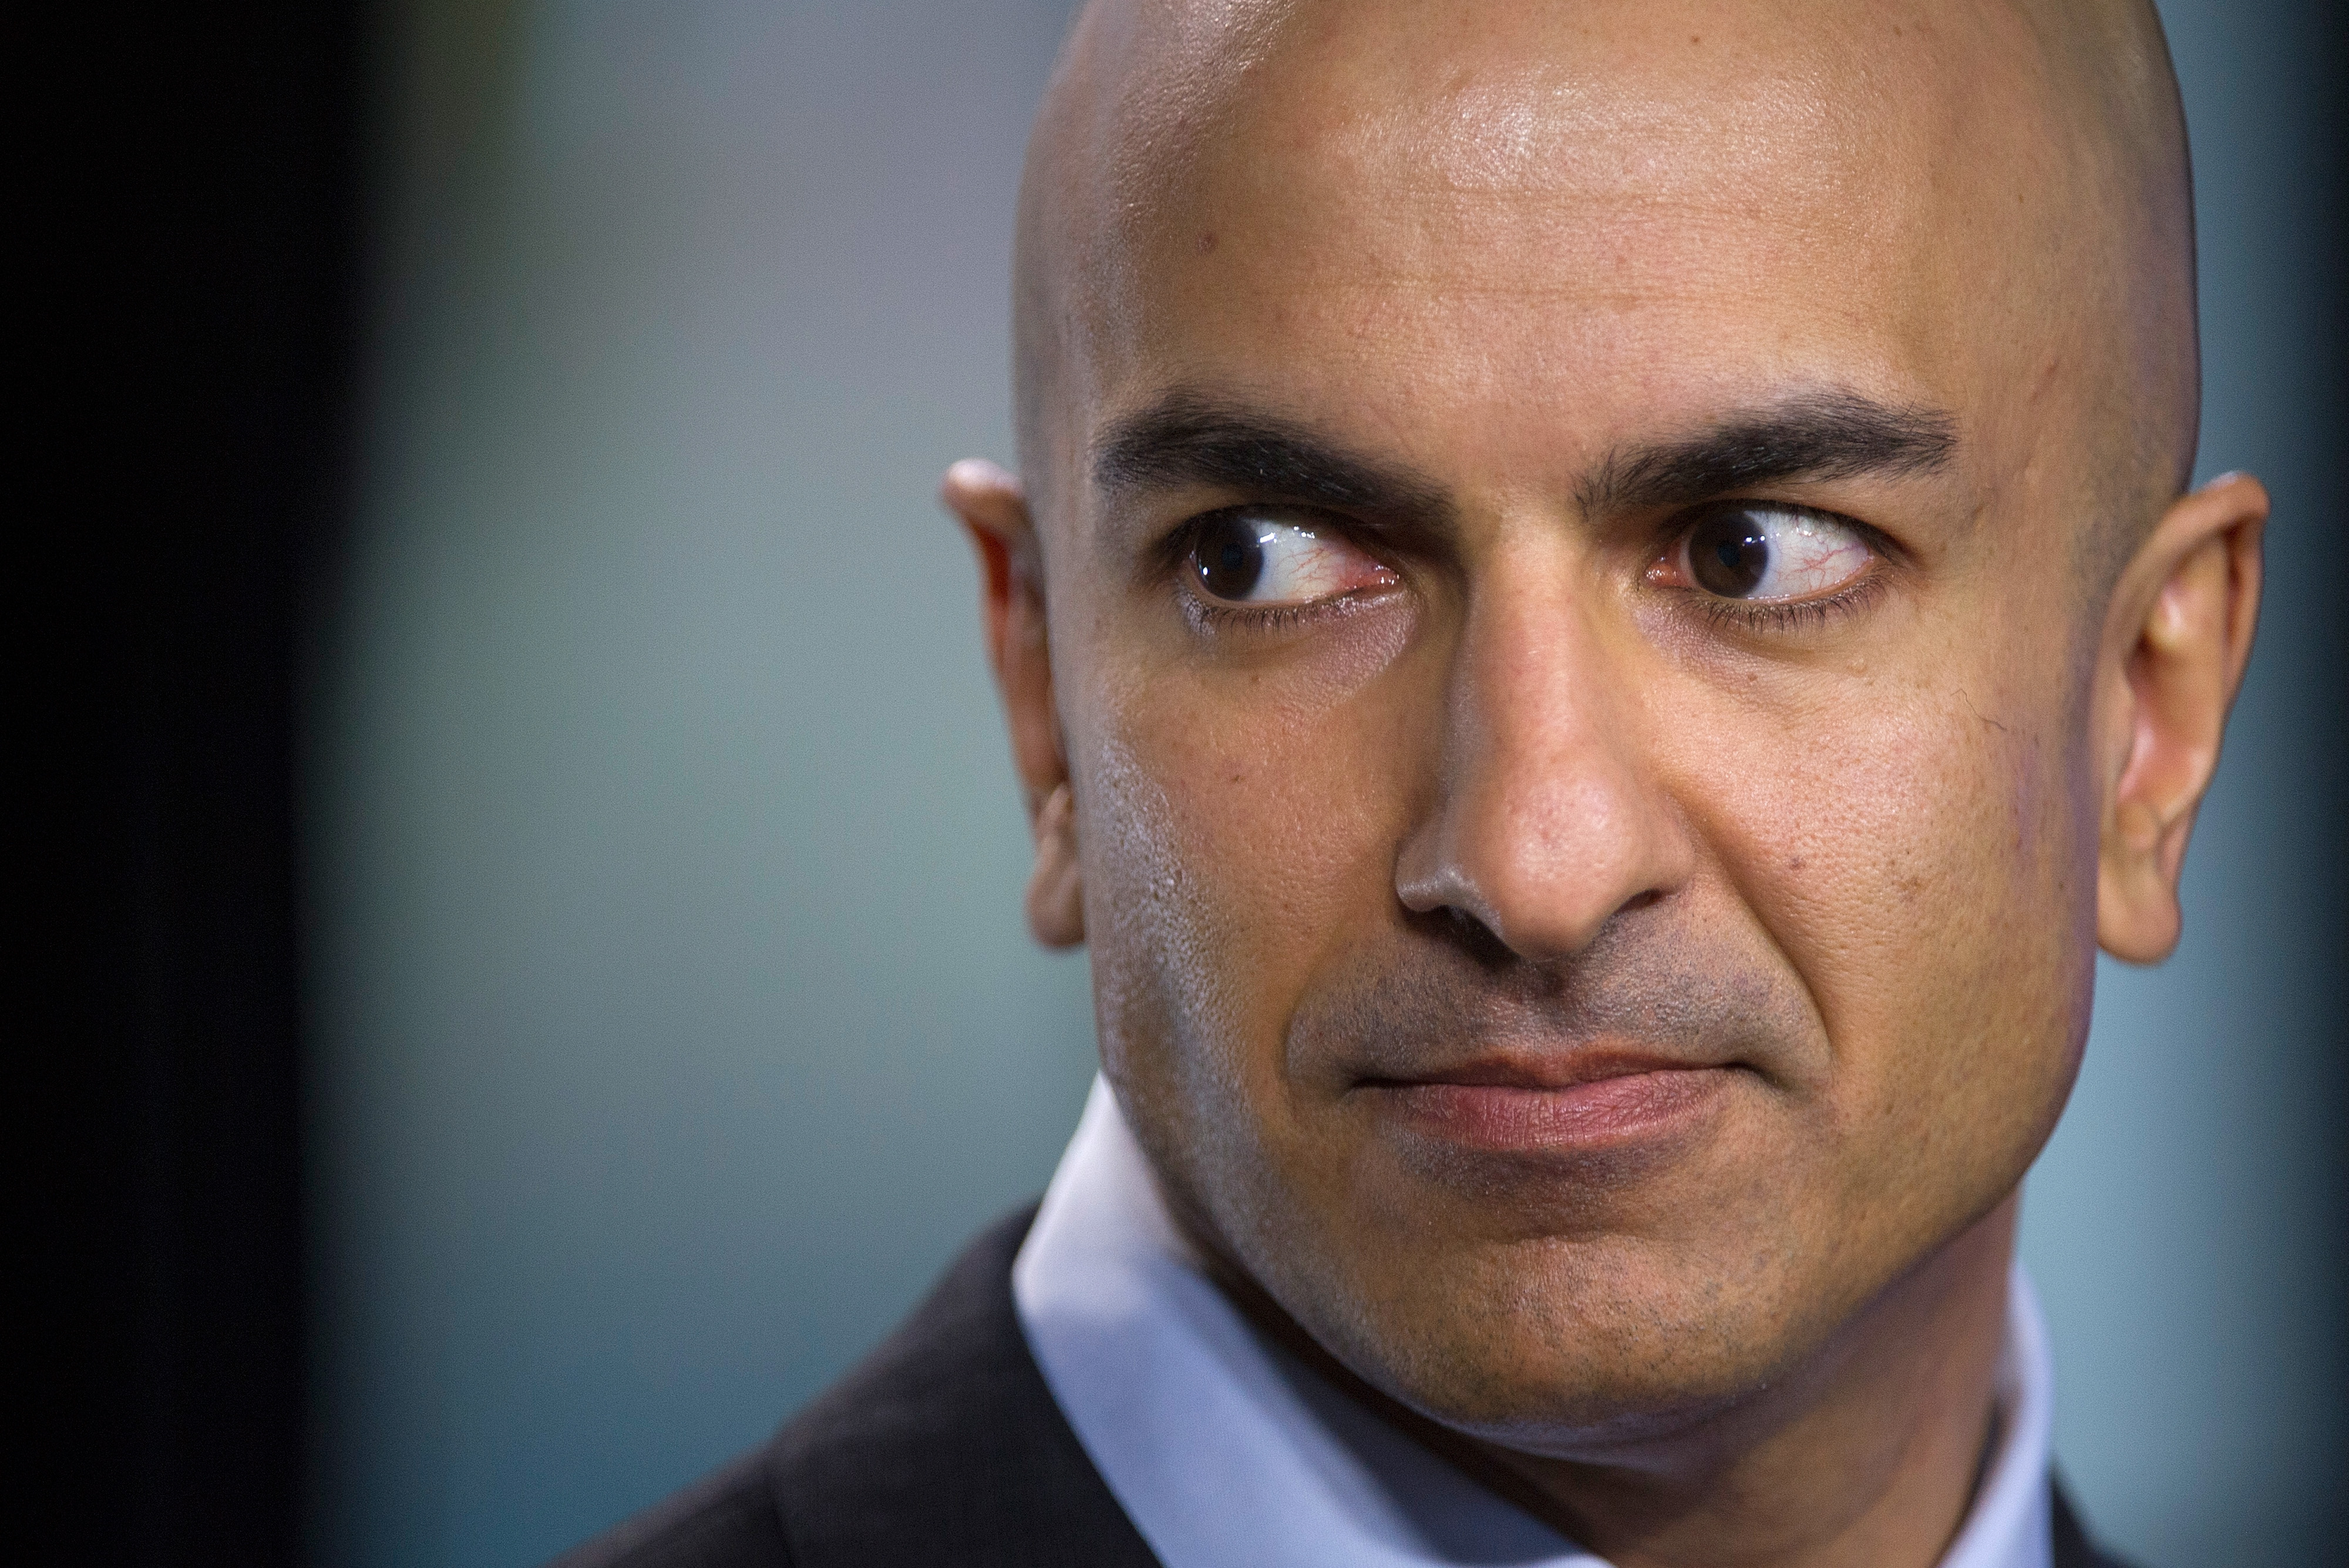 California Republican gubernatorial candidate Neel Kashkari pauses during a Bloomberg West Television interview in San Francisco, California, U.S., on Friday, Feb. 28, 2014. Kashkari, former head of the U.S. Treasury's bank bailout program, discussed his decision to run for governor in California. (Bloomberg—Bloomberg via Getty Images)